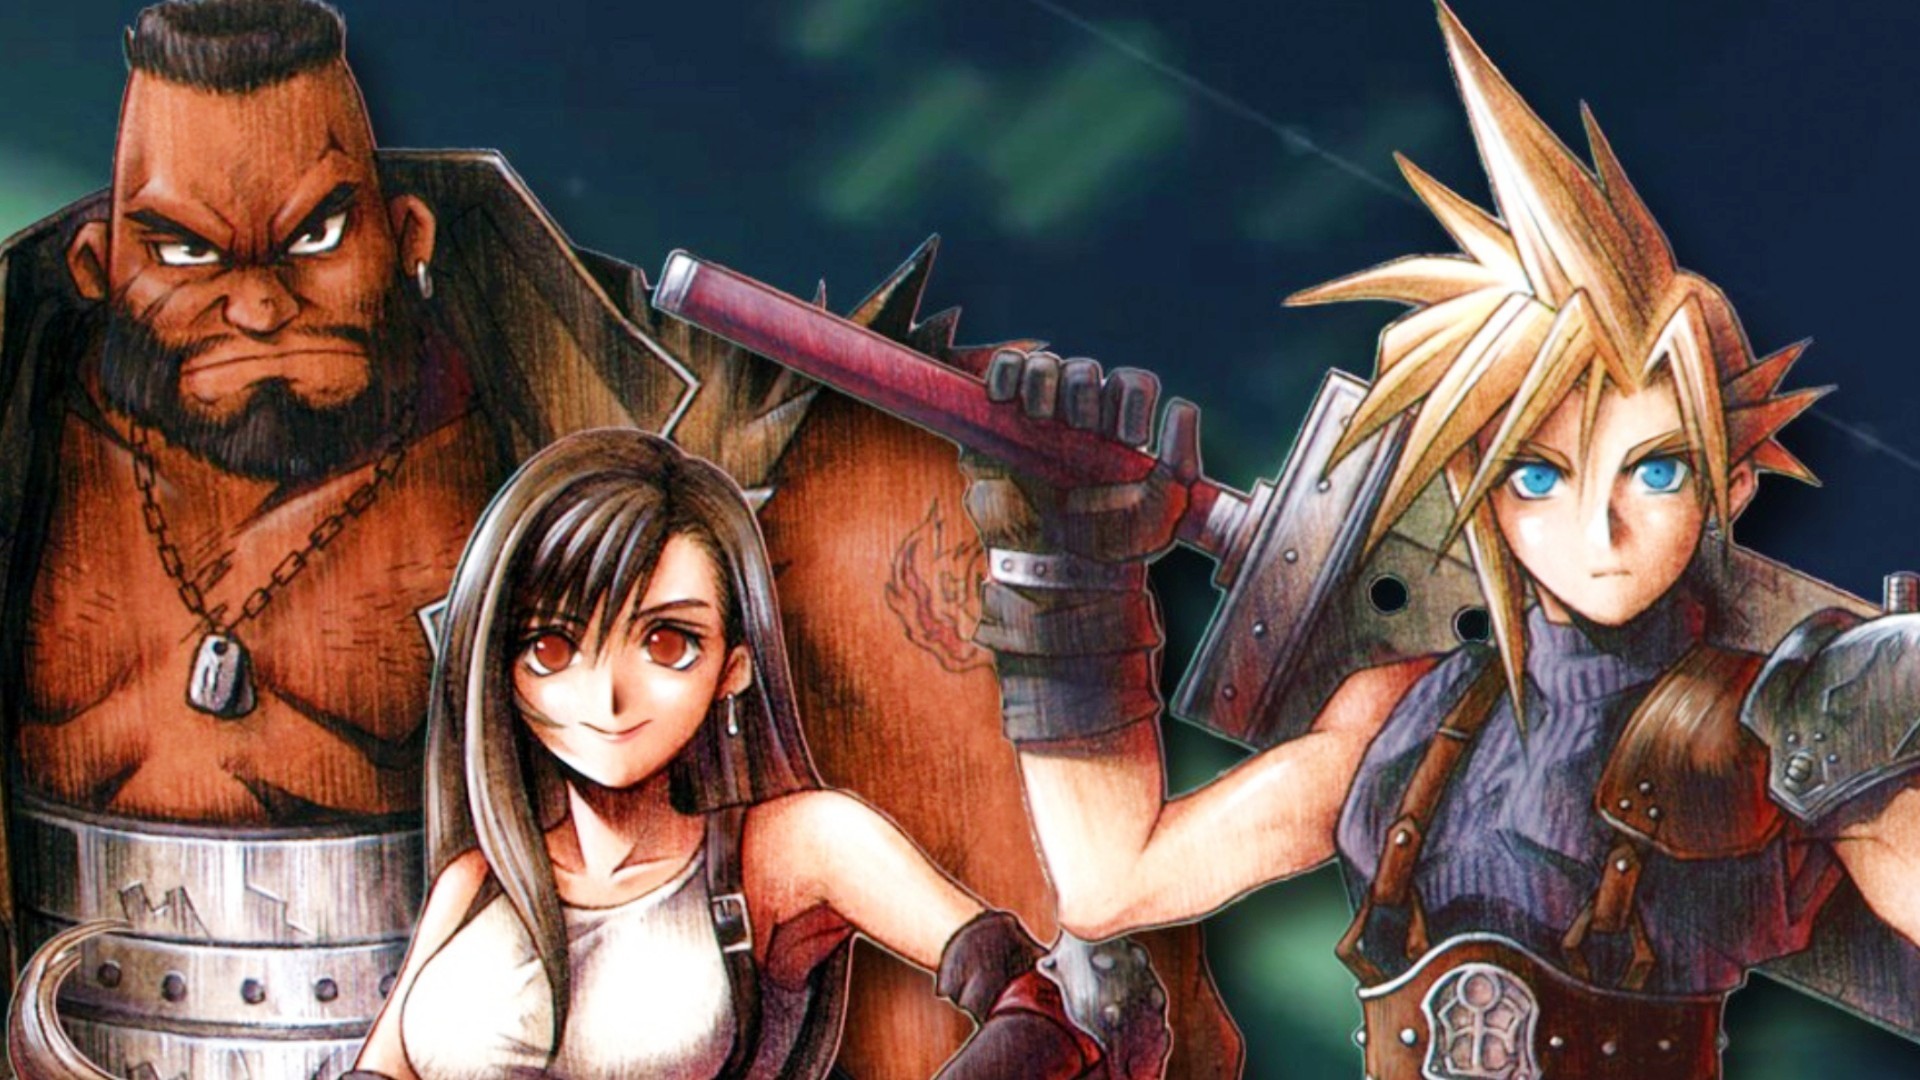 Final Fantasy 7 just got absolutely filthy